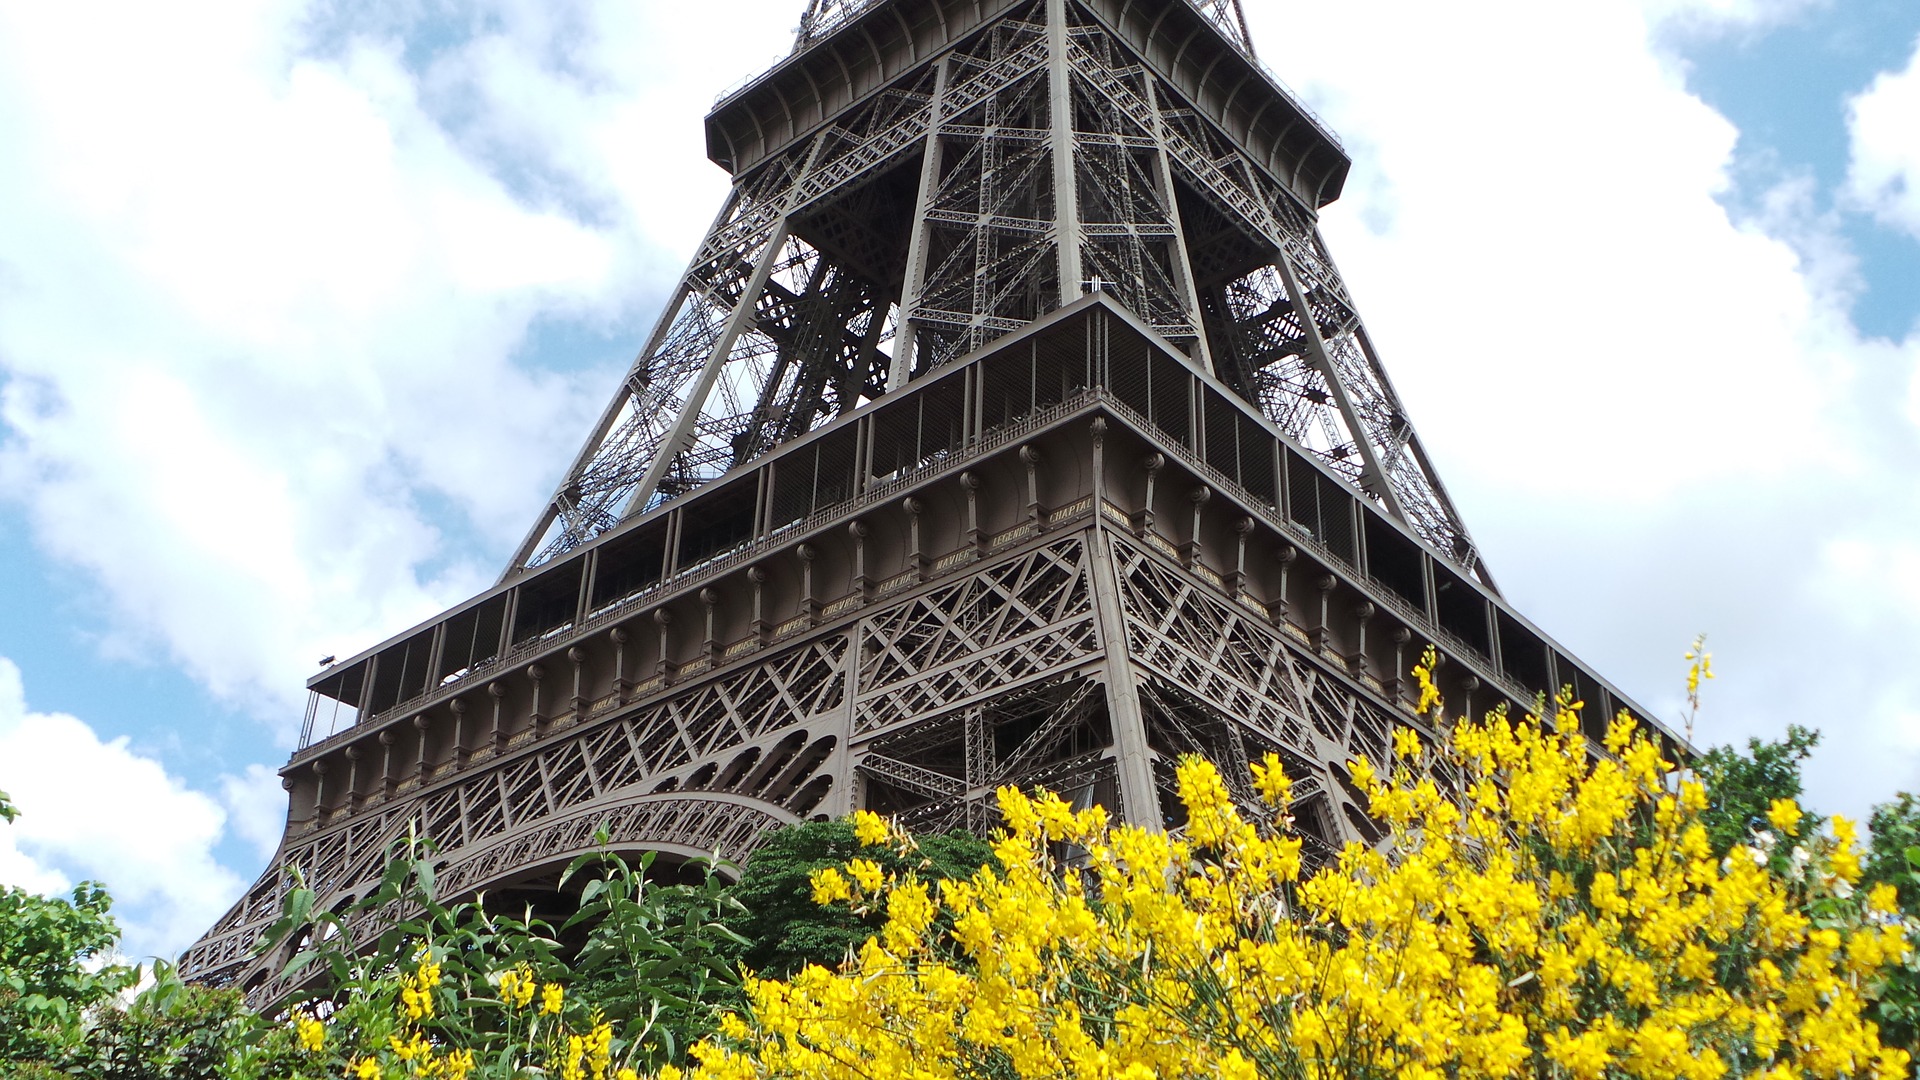 MyFrenchLife™ – MyFrenchLife.org - Paris in April - 2017 - Paris in spring - whats on - Eiffel Tower 